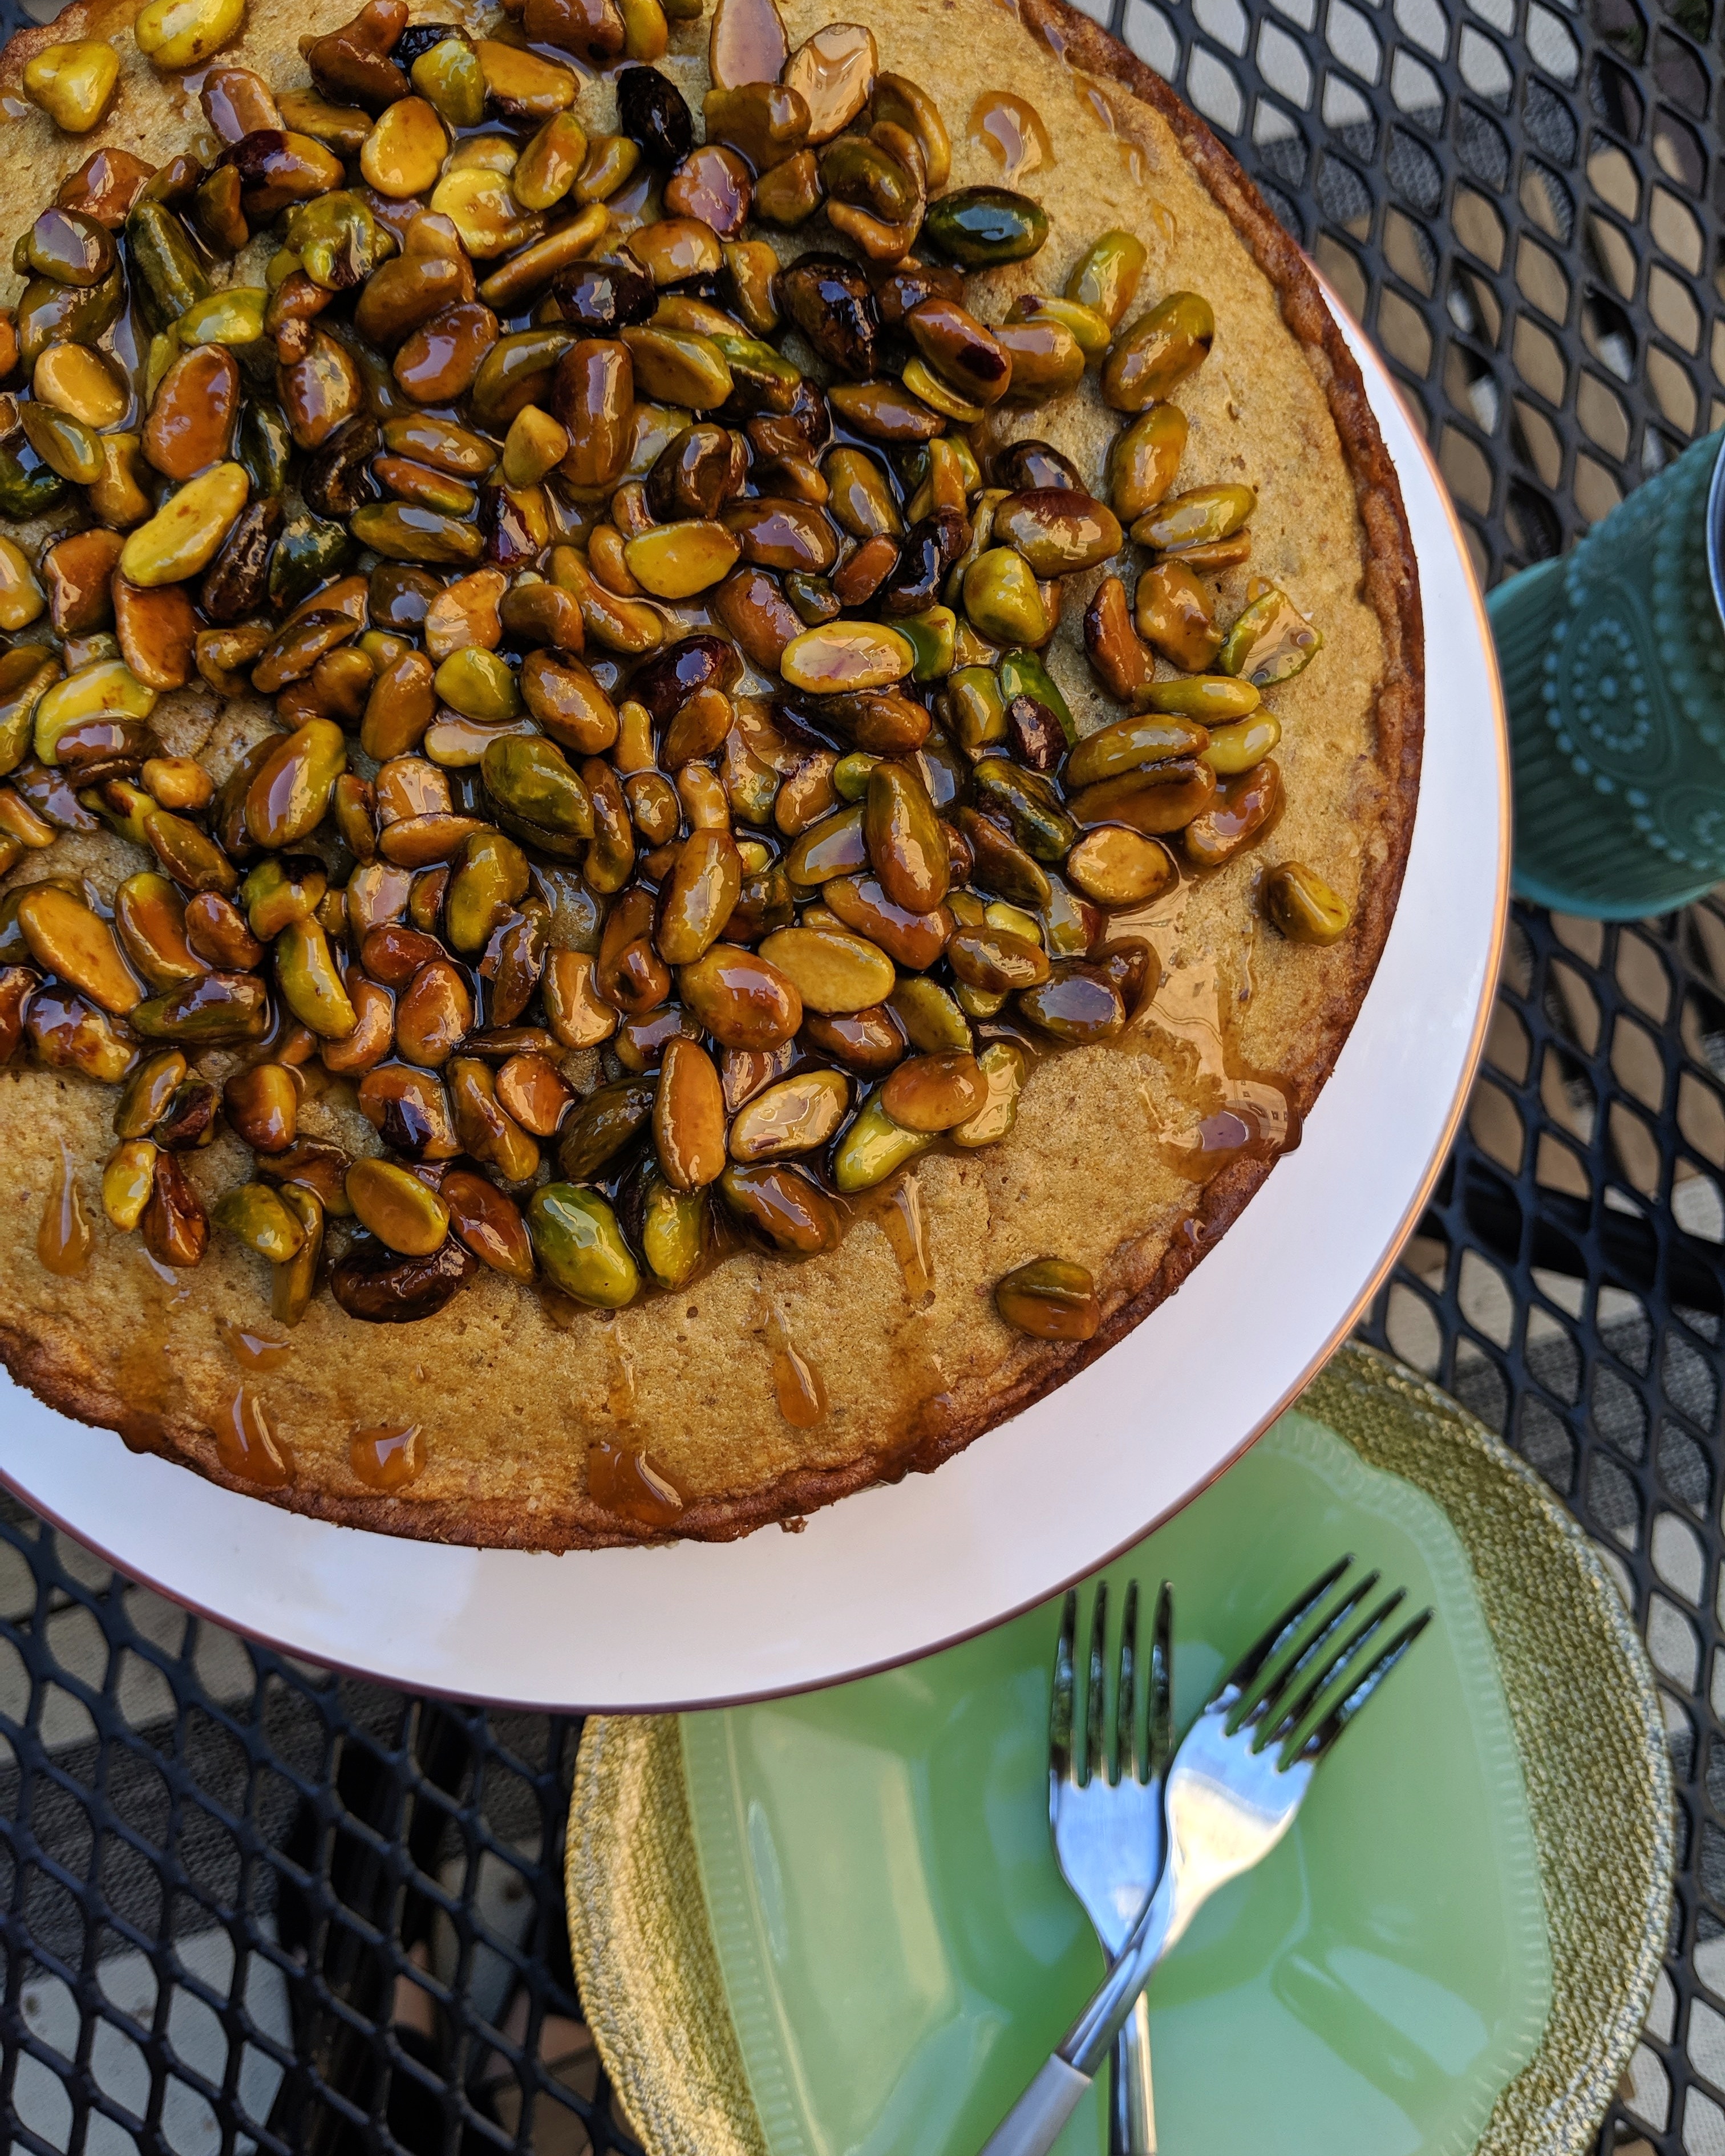 Top-down image of pistachio cake with honey-glazed pistachios on top